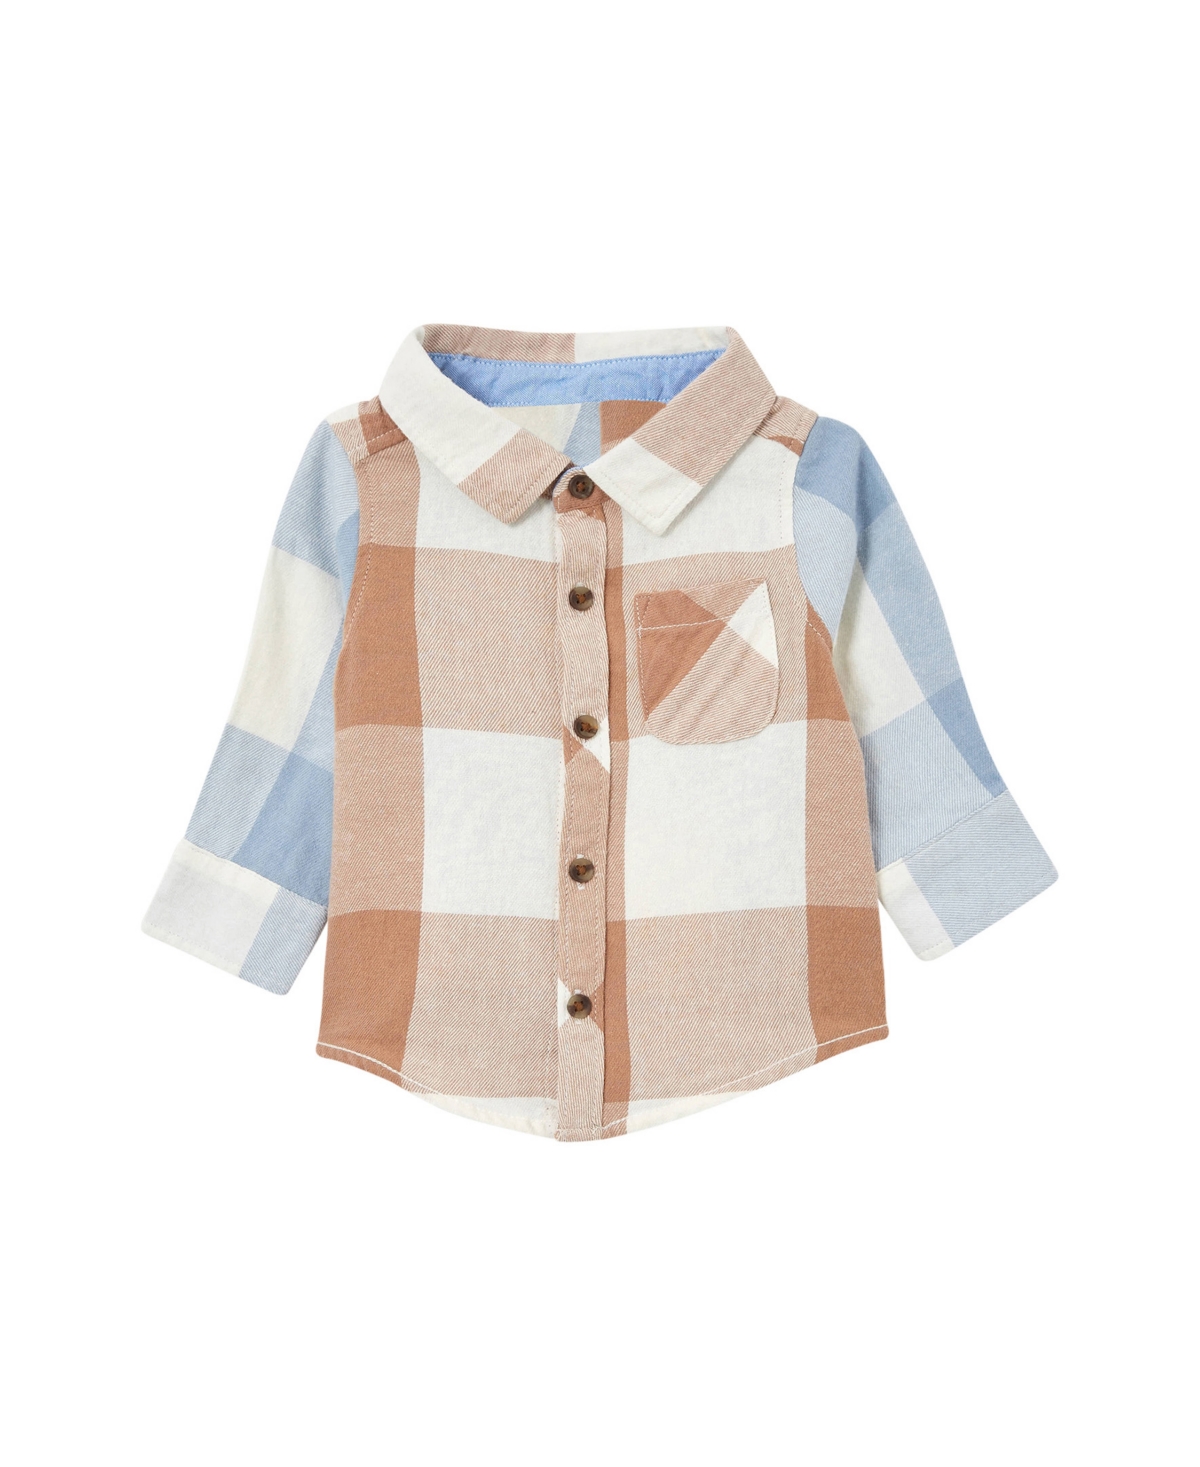 Cotton On Baby Boys Rugged Long Sleeves Shirt In Taupe Brown,dusty Blue Splice Plaid